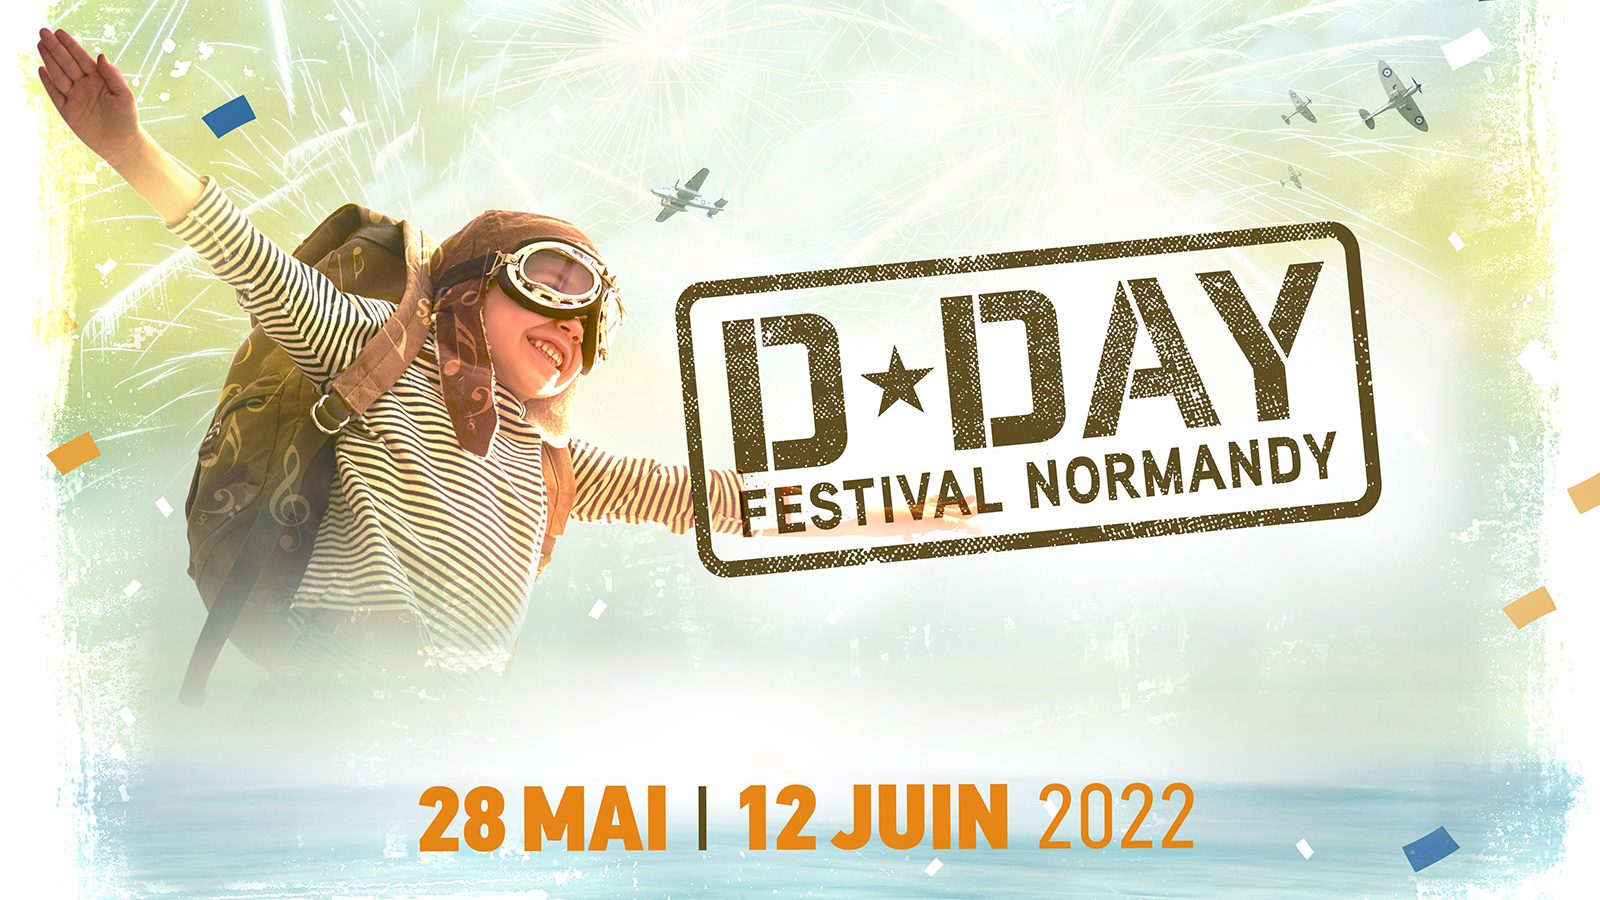 DDay Festival Normandy Normandy Tourism, France